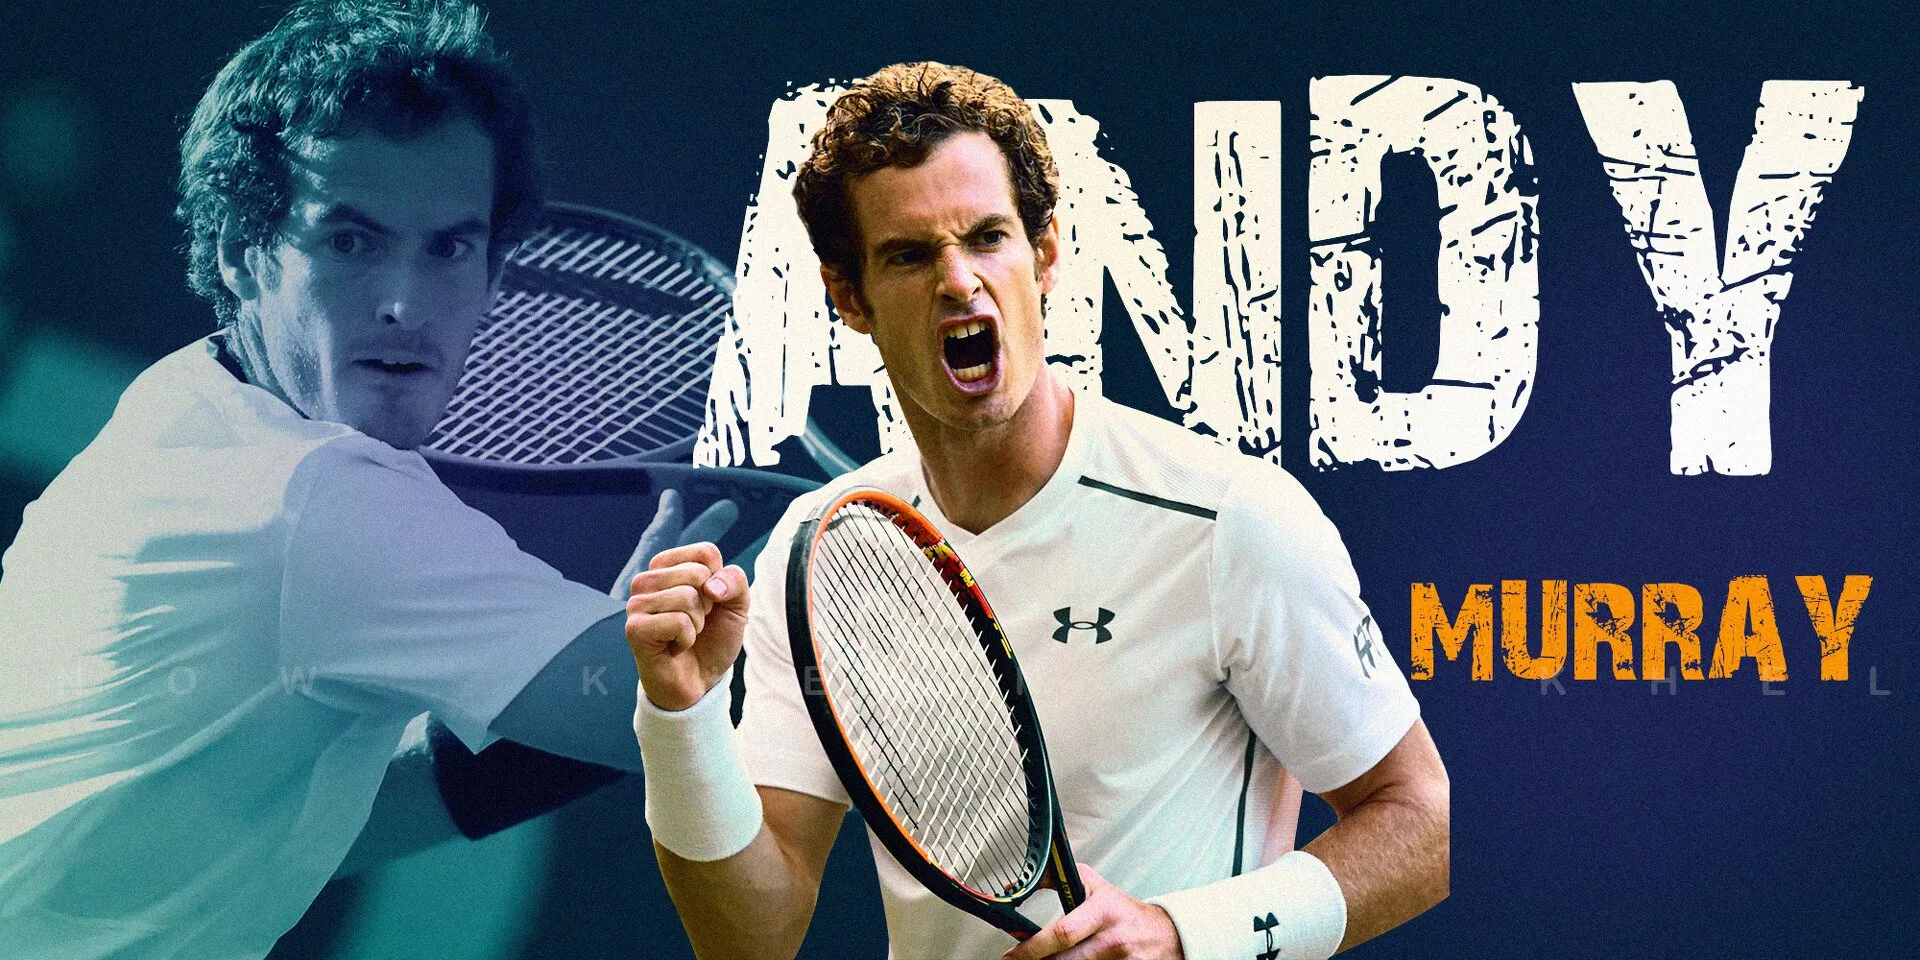 Andy Murray's career in numbers: Records, stats and titles